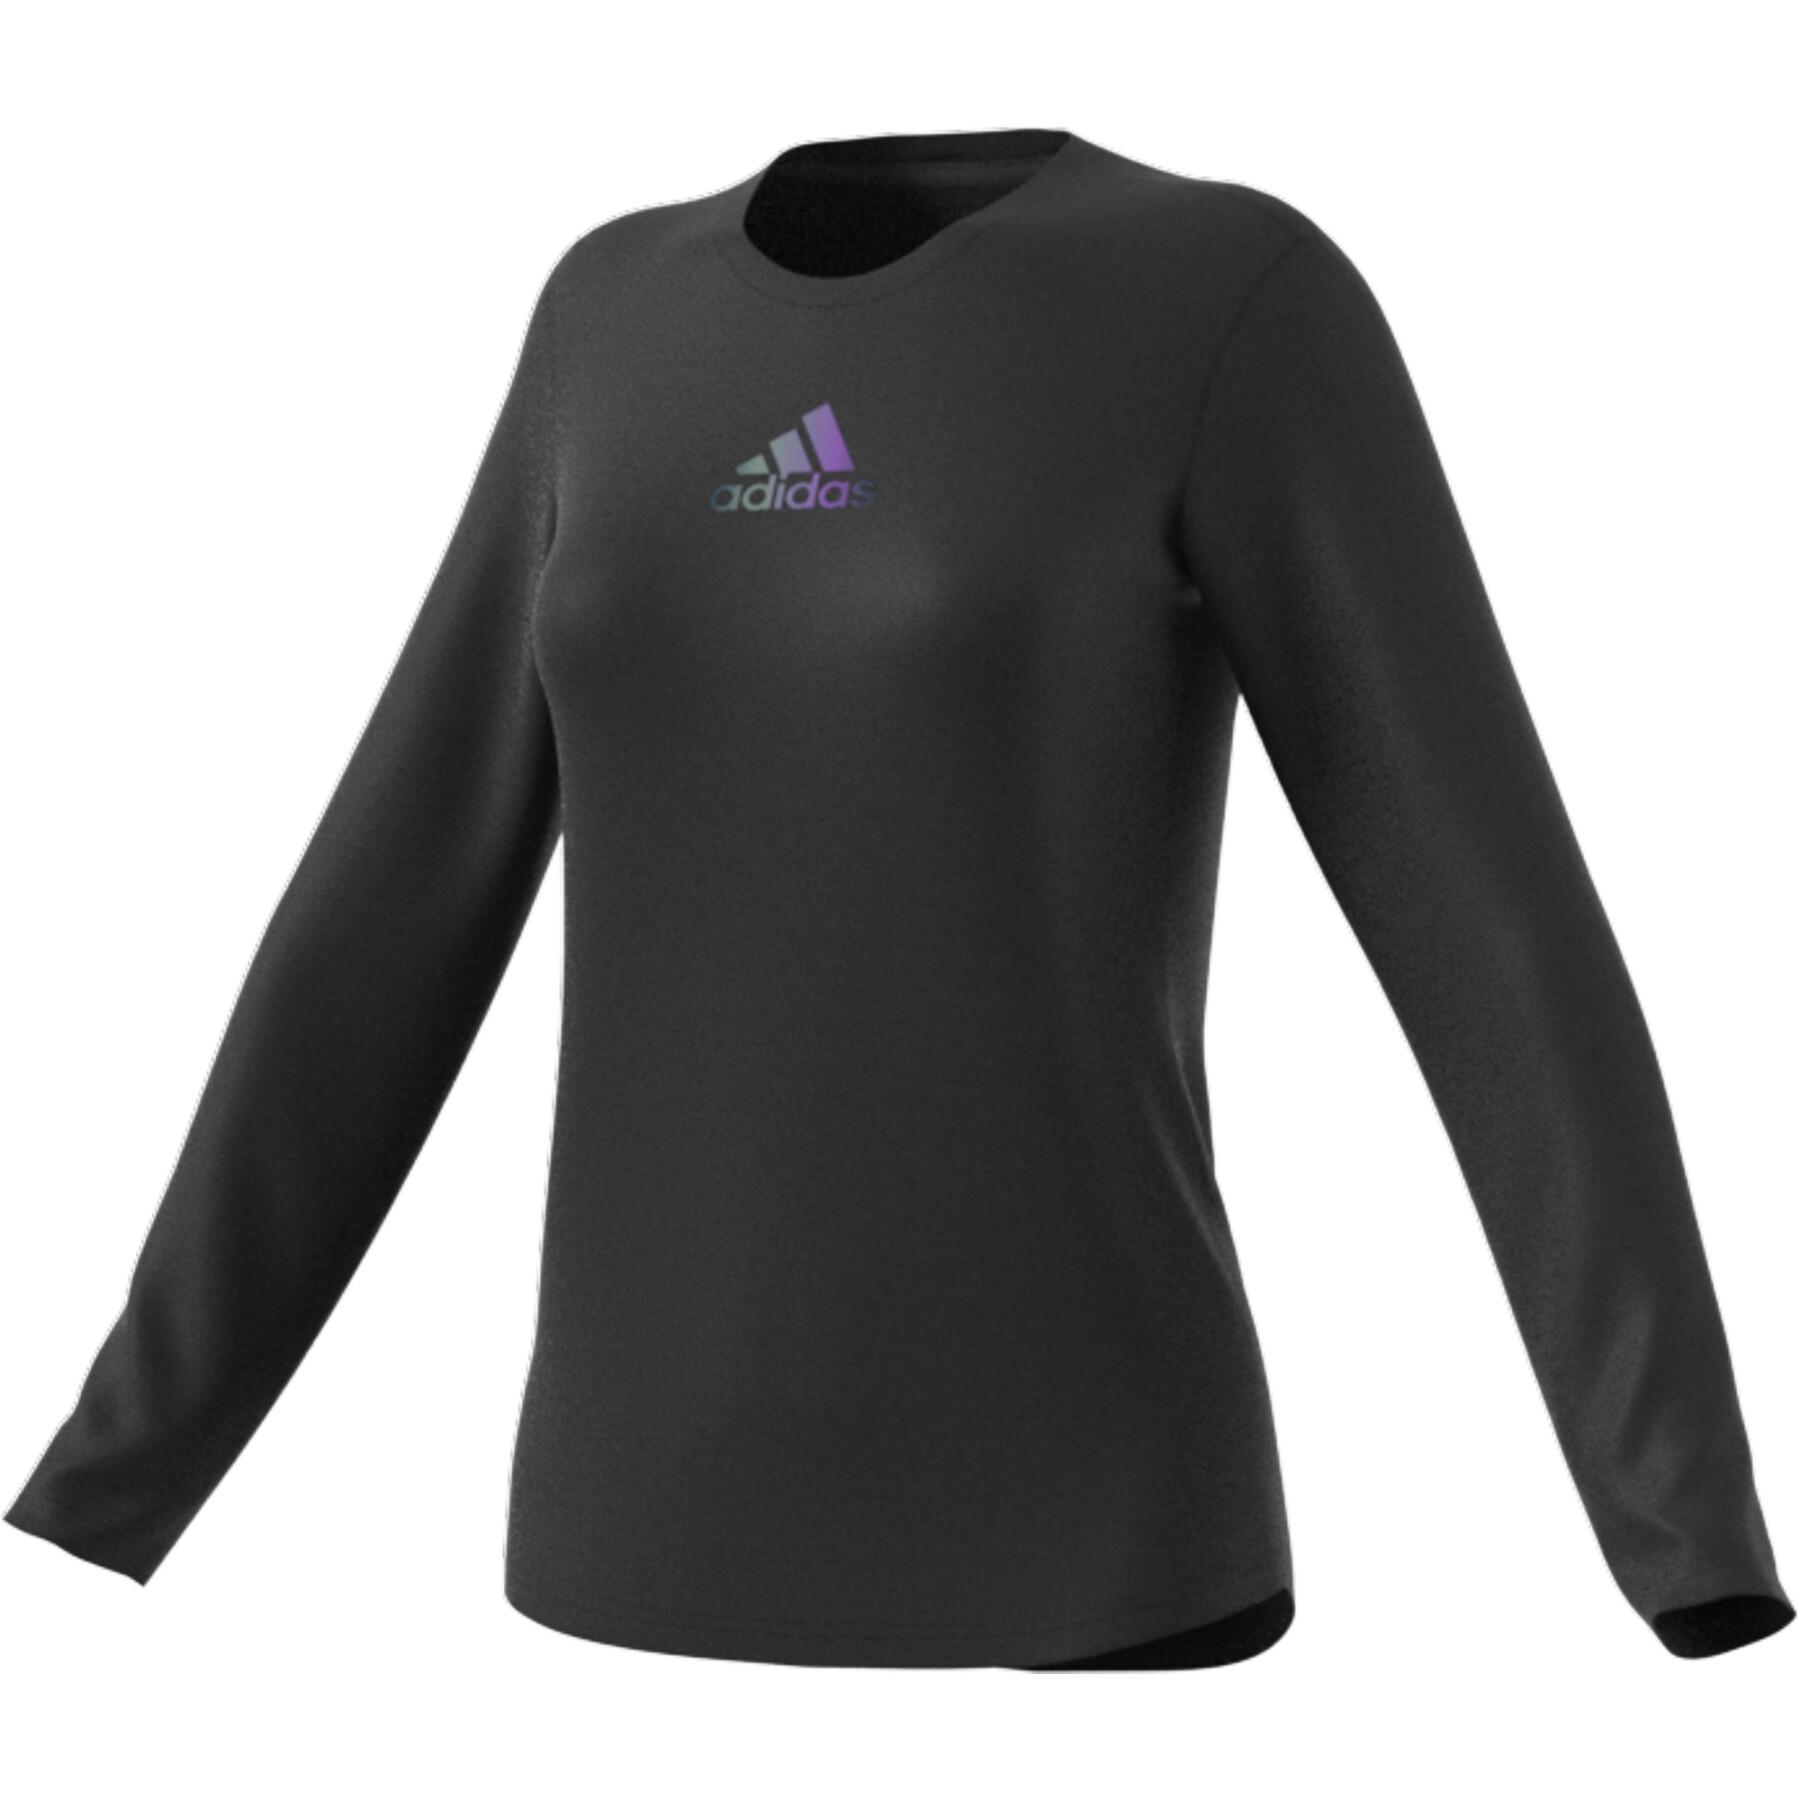 T-shirt maniche lunghe donna adidas You for You